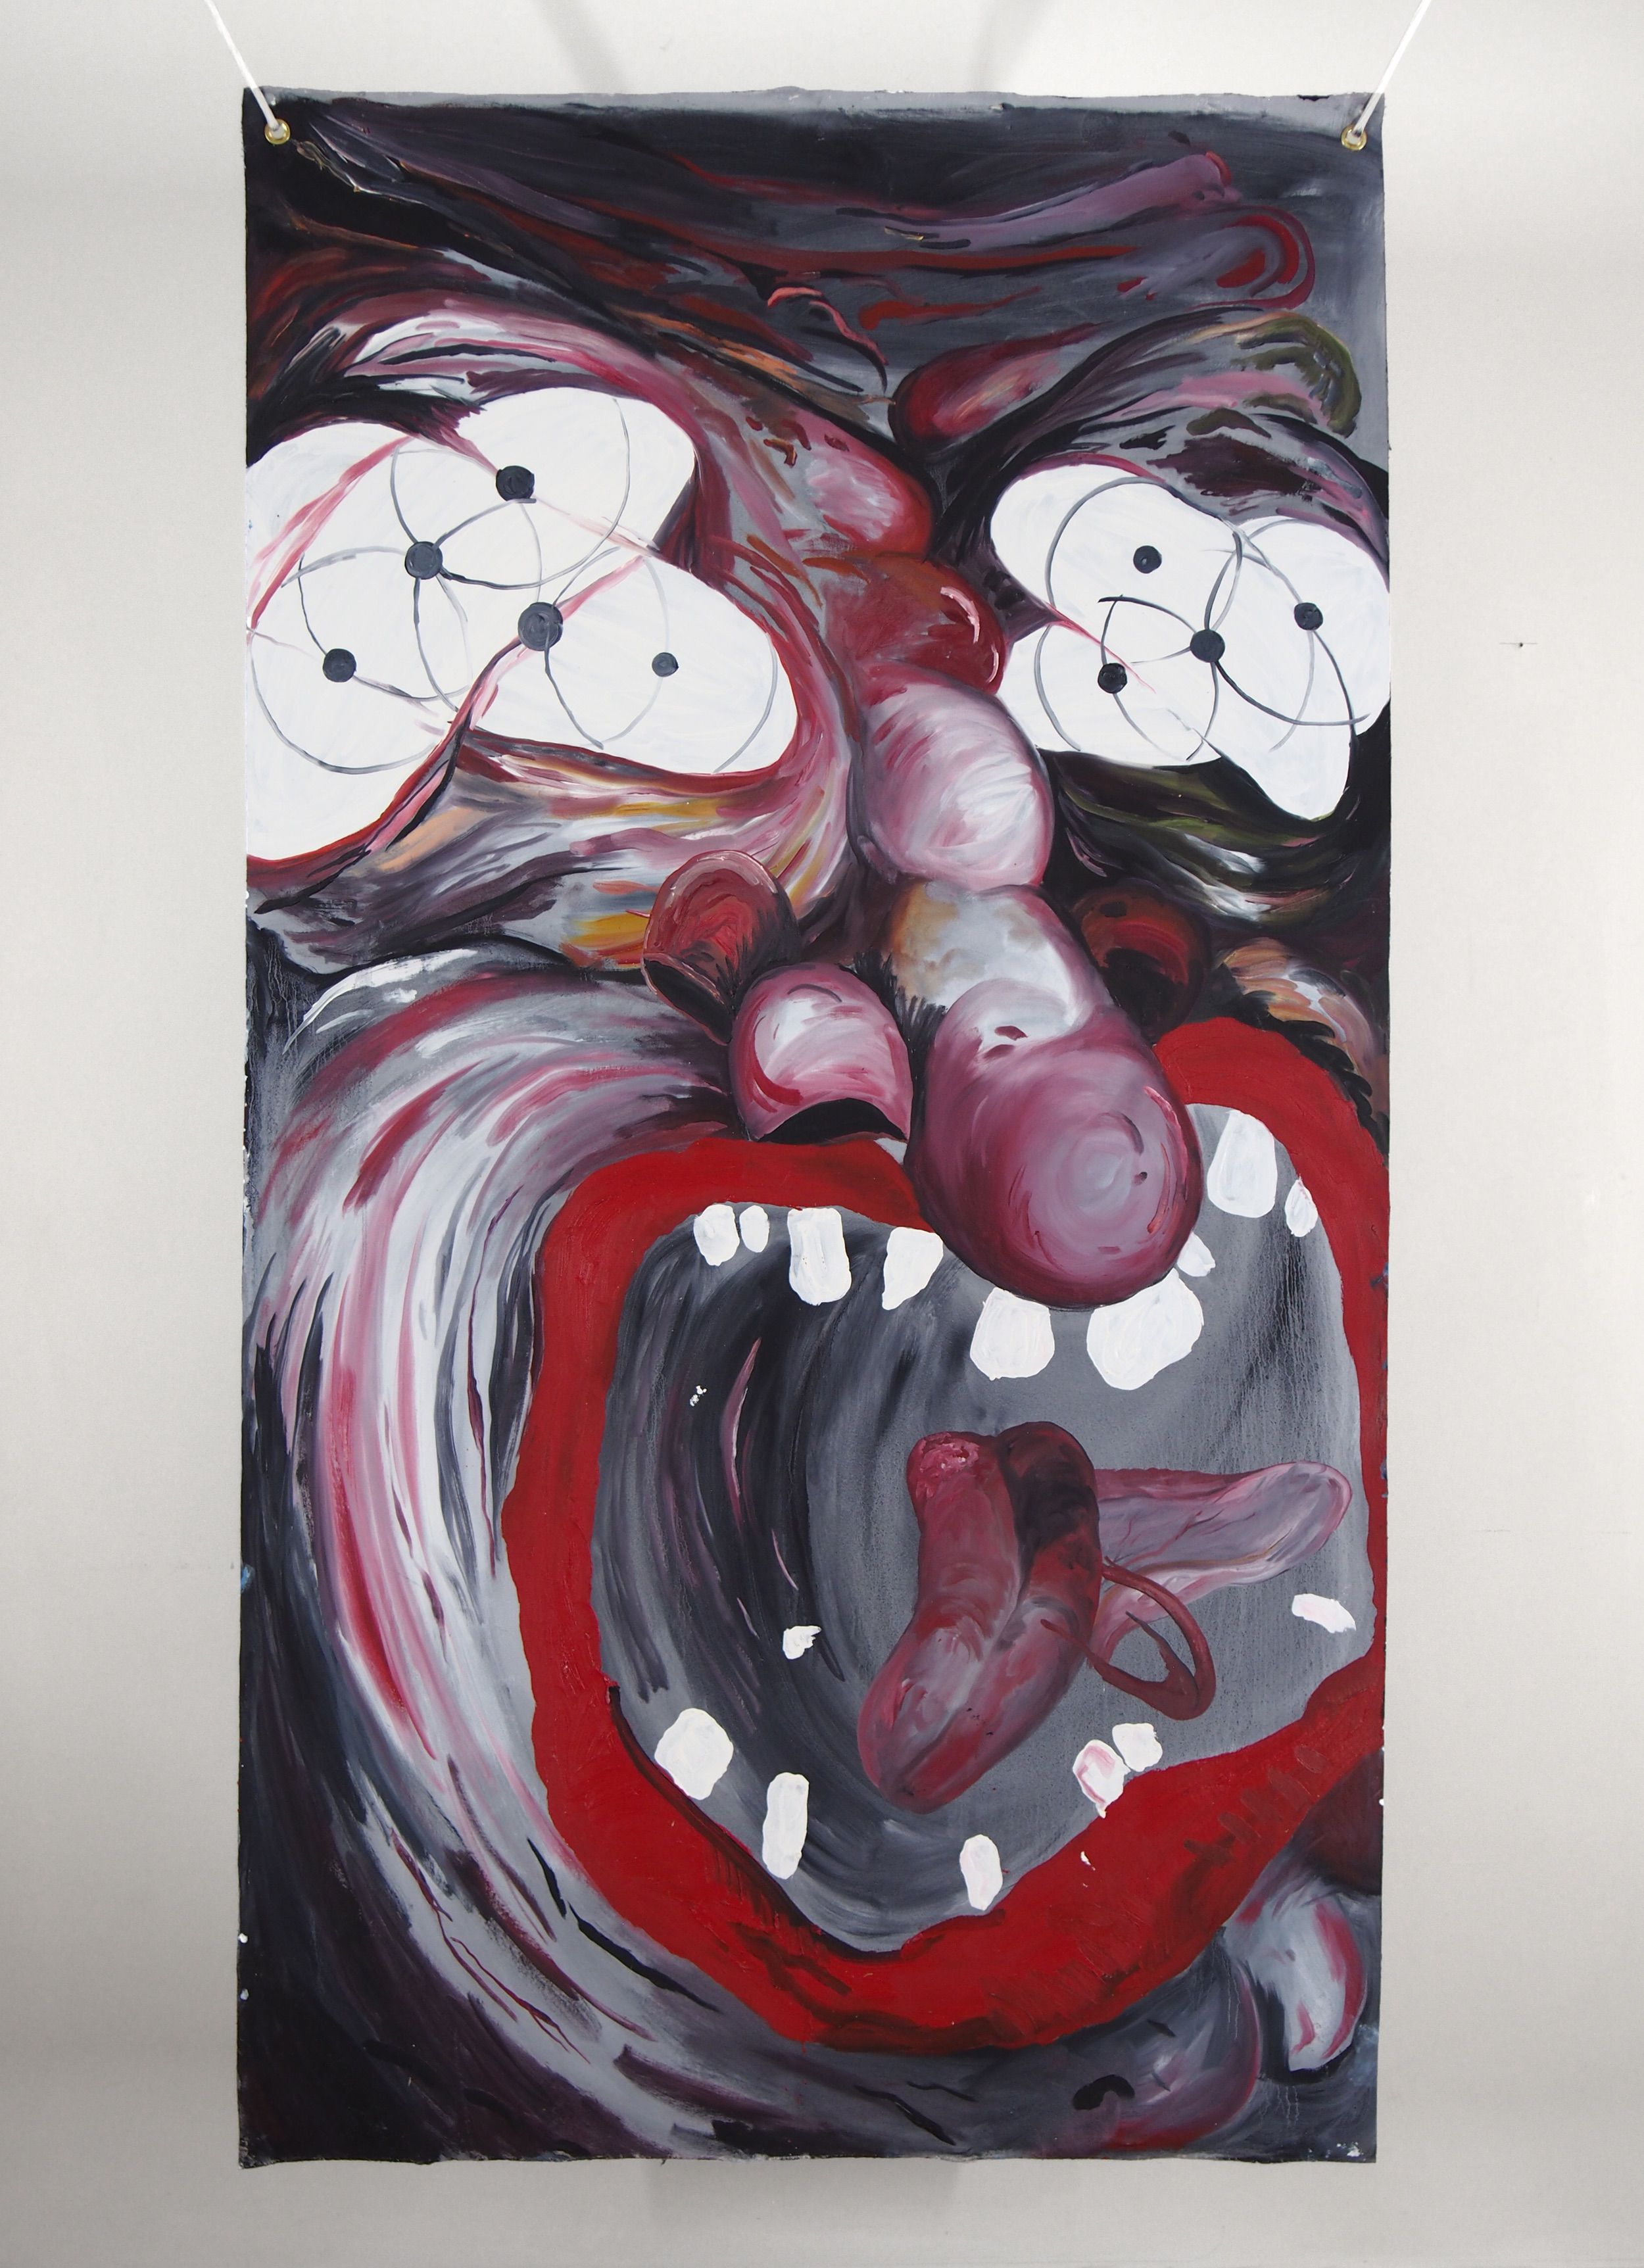  Morgan Mandalay  Screamer 2 , 2018 Oil paint on double-sided canvas 70 x 36 inches 